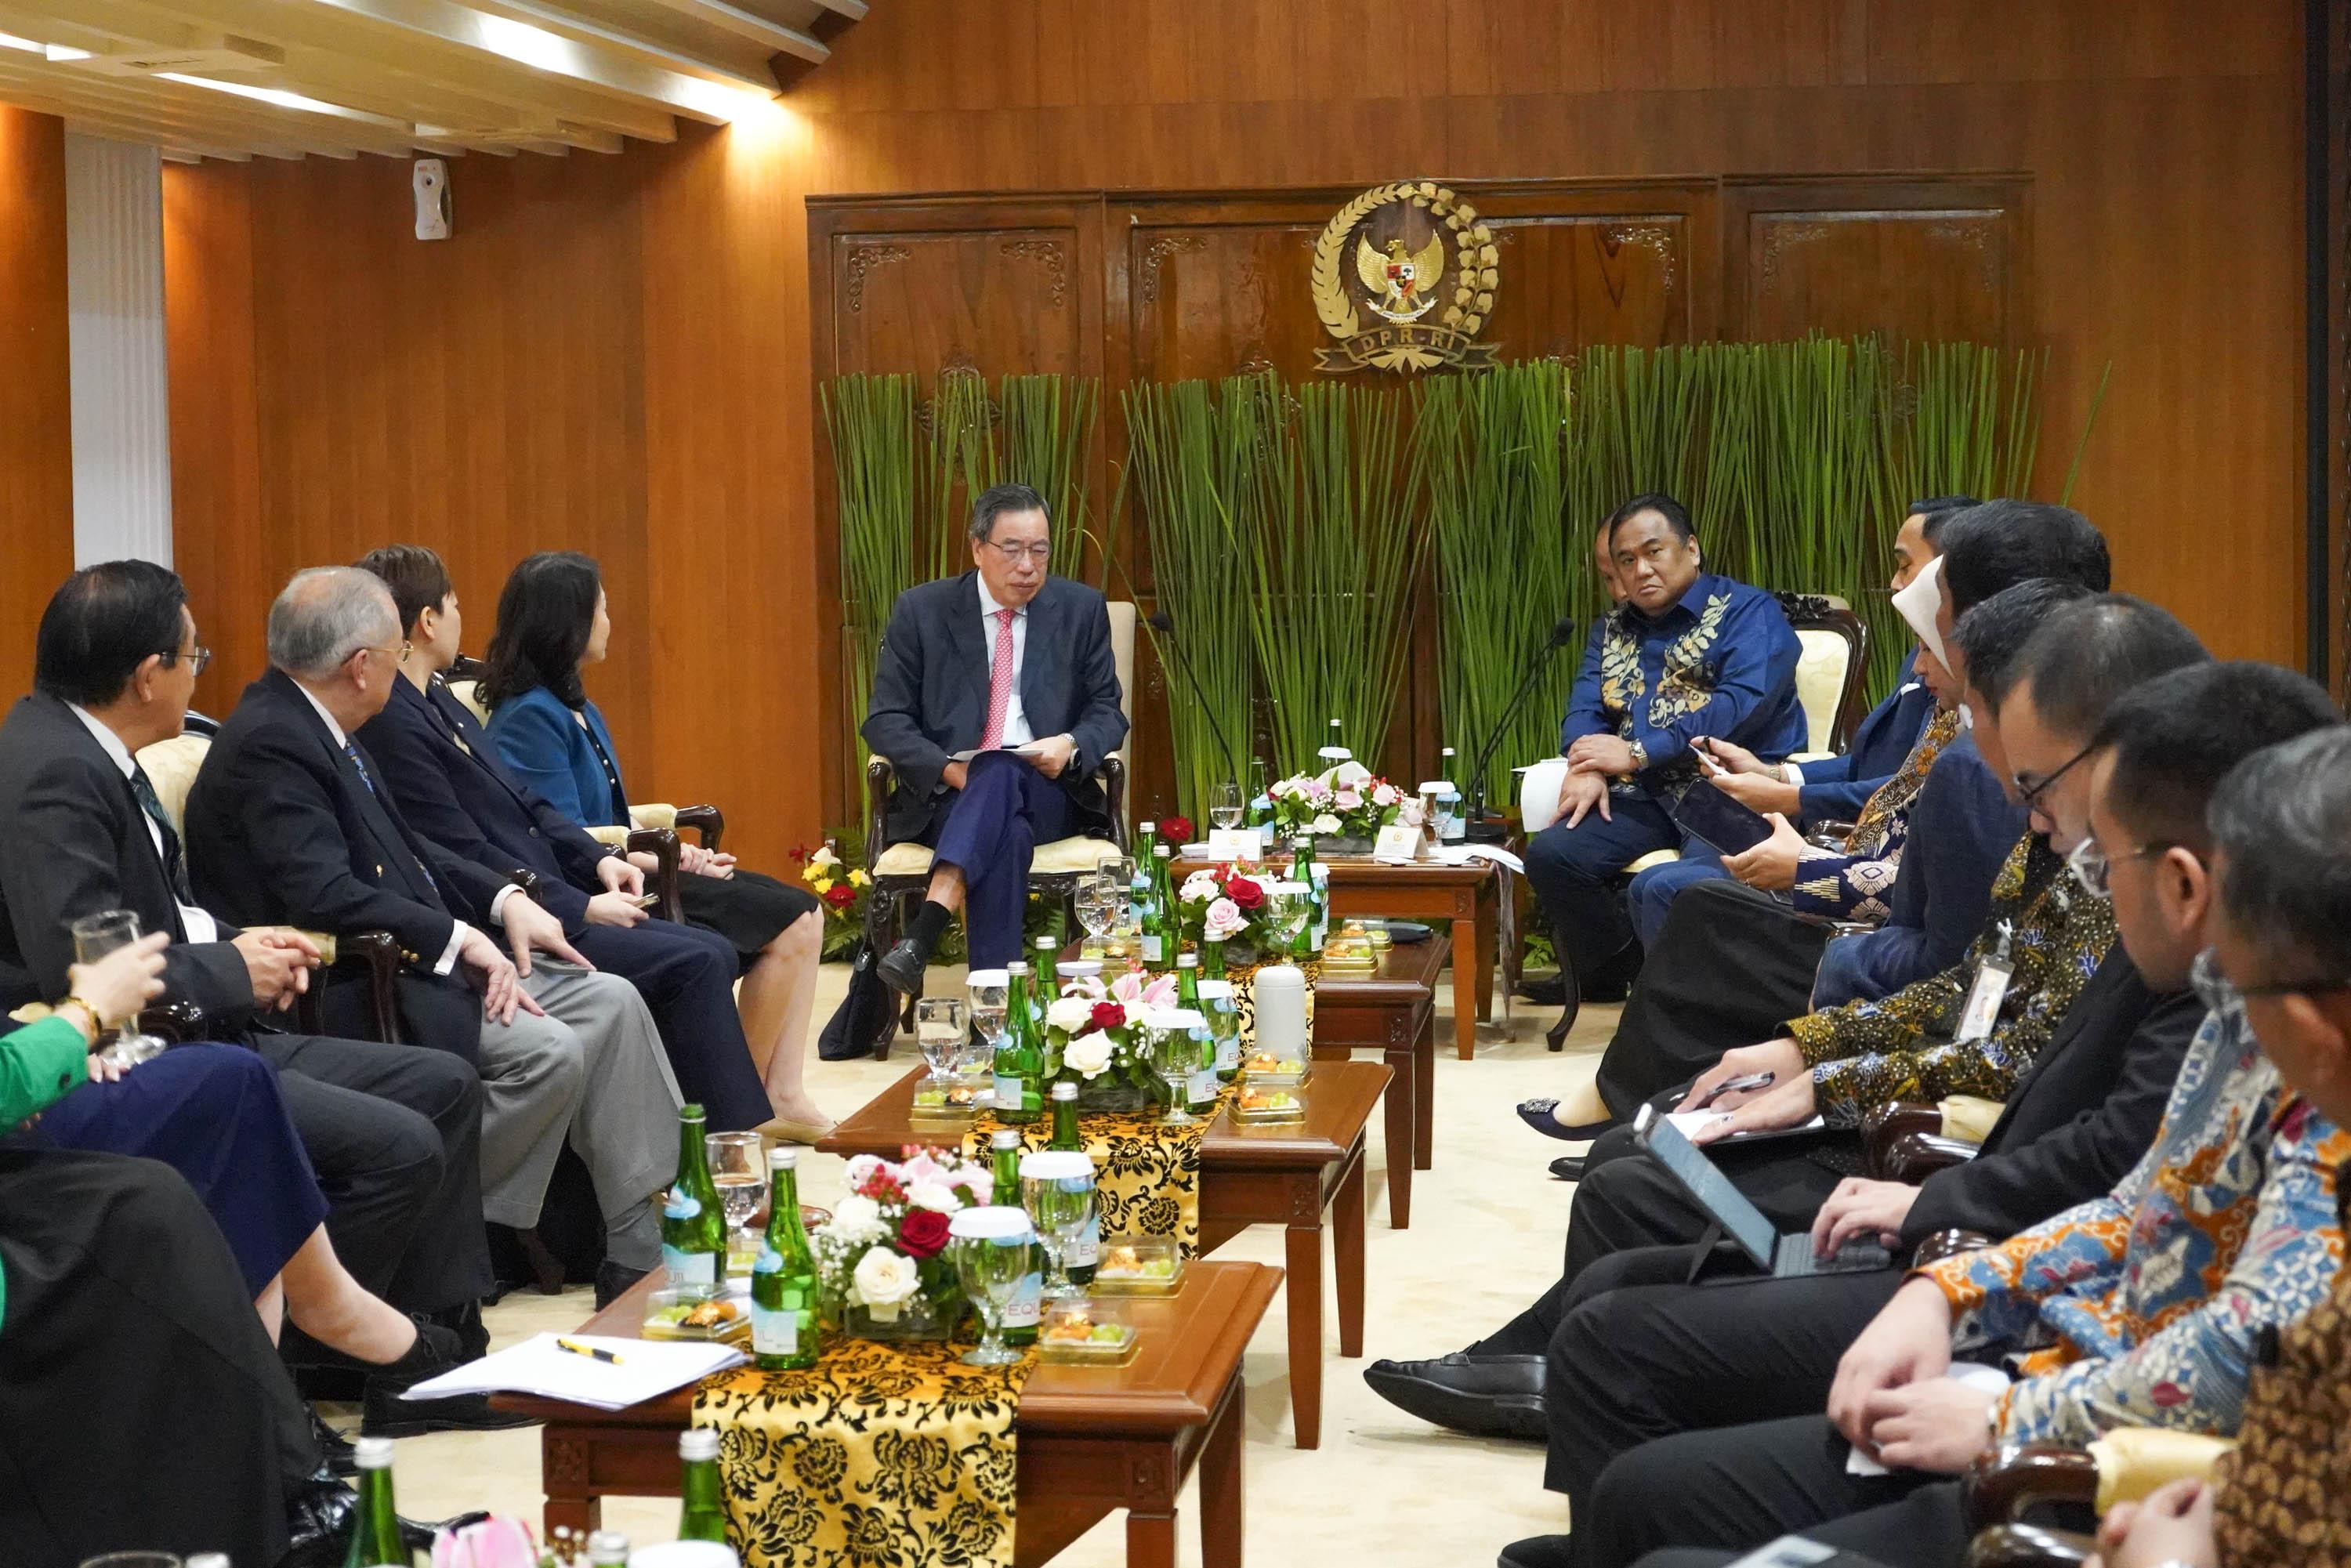 The Legislative Council delegation continued its duty visit in Indonesia today (May 16). Photo shows the President of LegCo, Mr Andrew Leung (fifth left), and members of the delegation meeting with the Deputy Speaker of the House of Representatives, Mr Rachmat Gobel (sixth left).